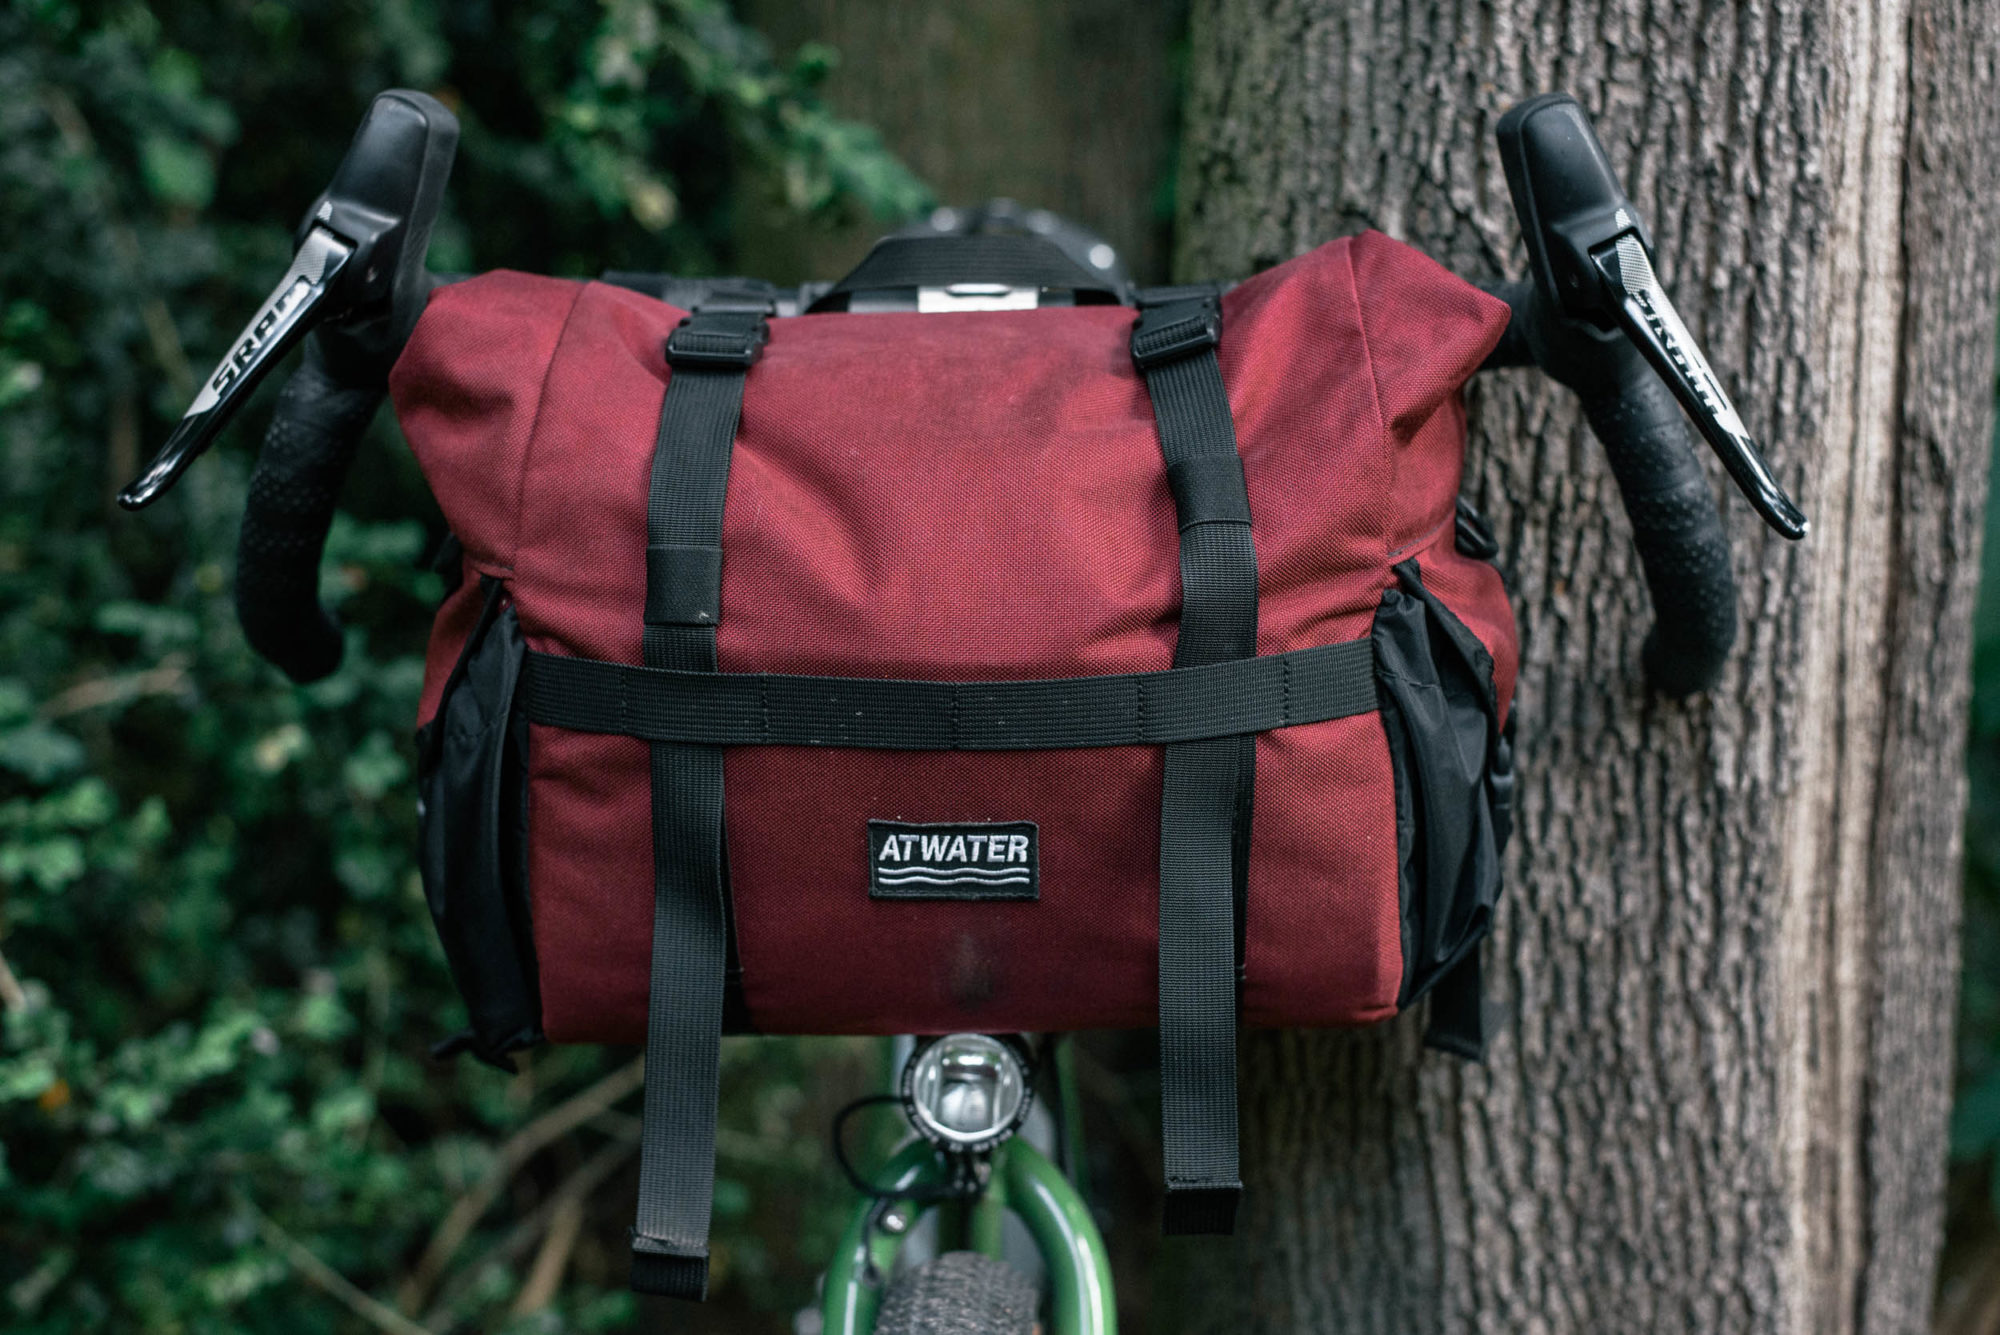 Double-Stitched for Maximum Durability Kensington All Around Thermal Saddle Bags — Made with PVC Nylon for Waterproof Protection and Insulation to Keep Your Snacks Fresh — Tear-Resistant 